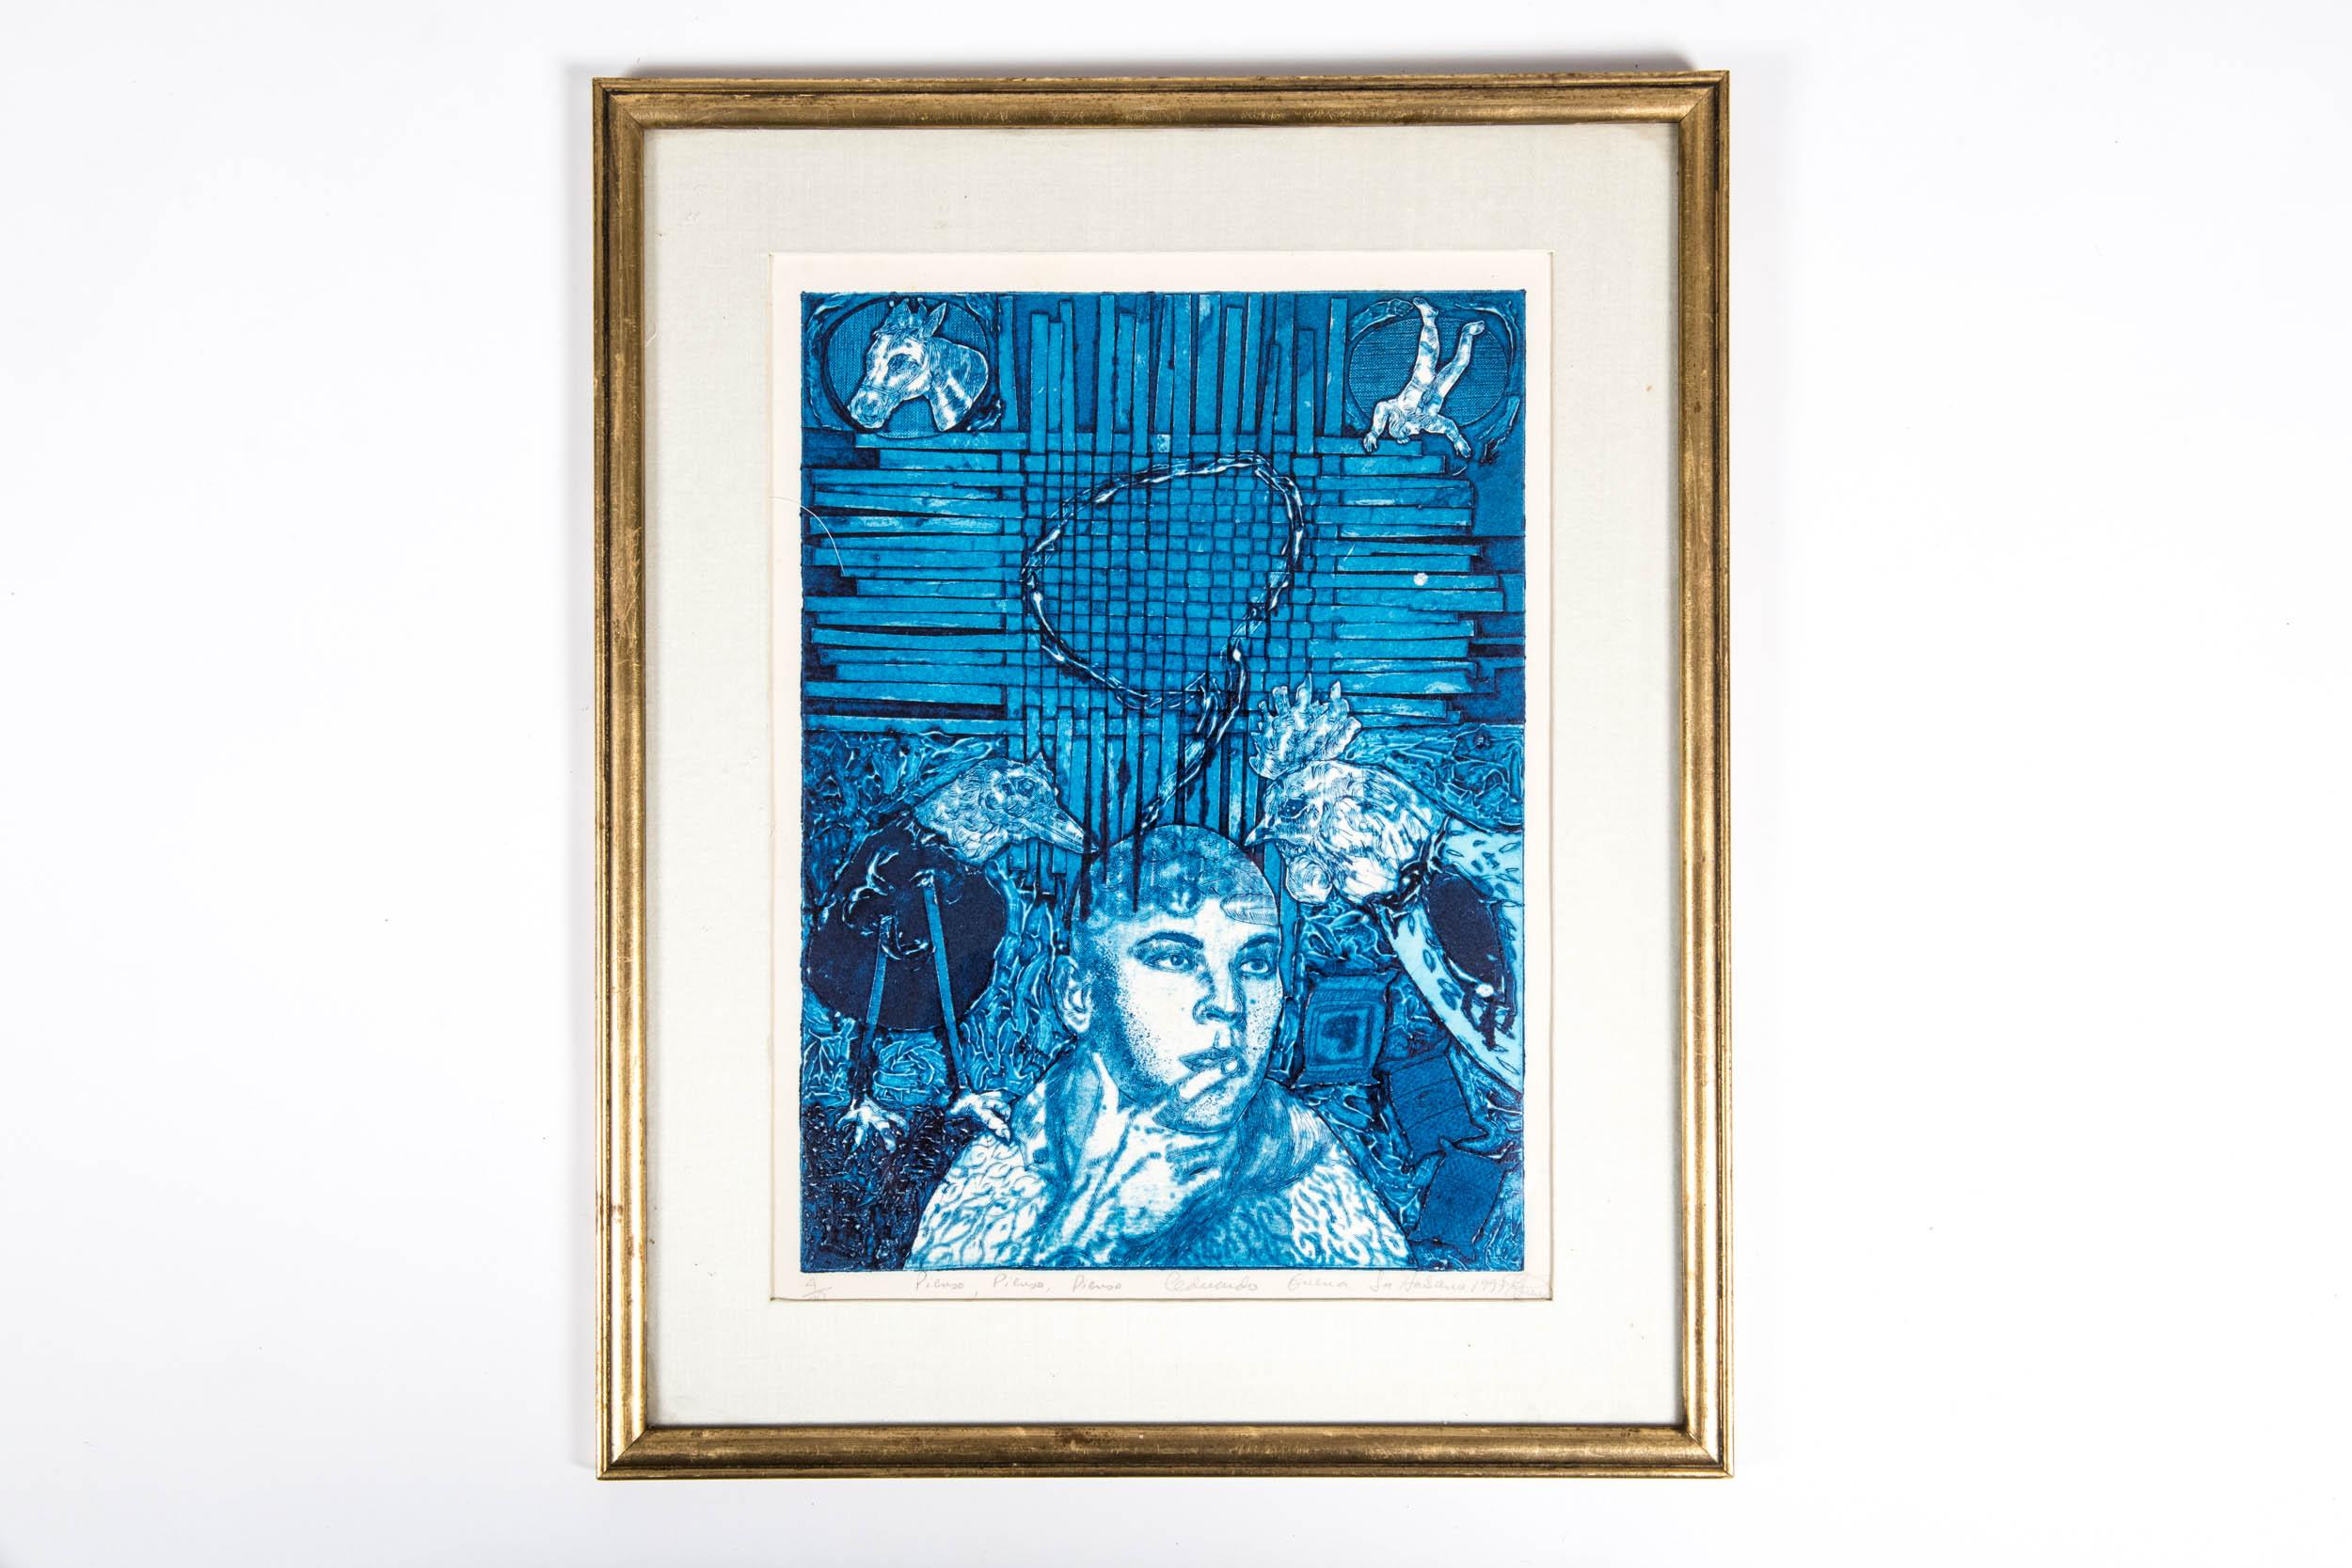 Late 20th century numbered  pienso drawing with gilt wood frame. The drawing is numbered, signed and dated by the artist. The drawing is in excellent condition. Minor wear consistent with use / age. The drawing is about 15.5 inches X 11.5 inches.